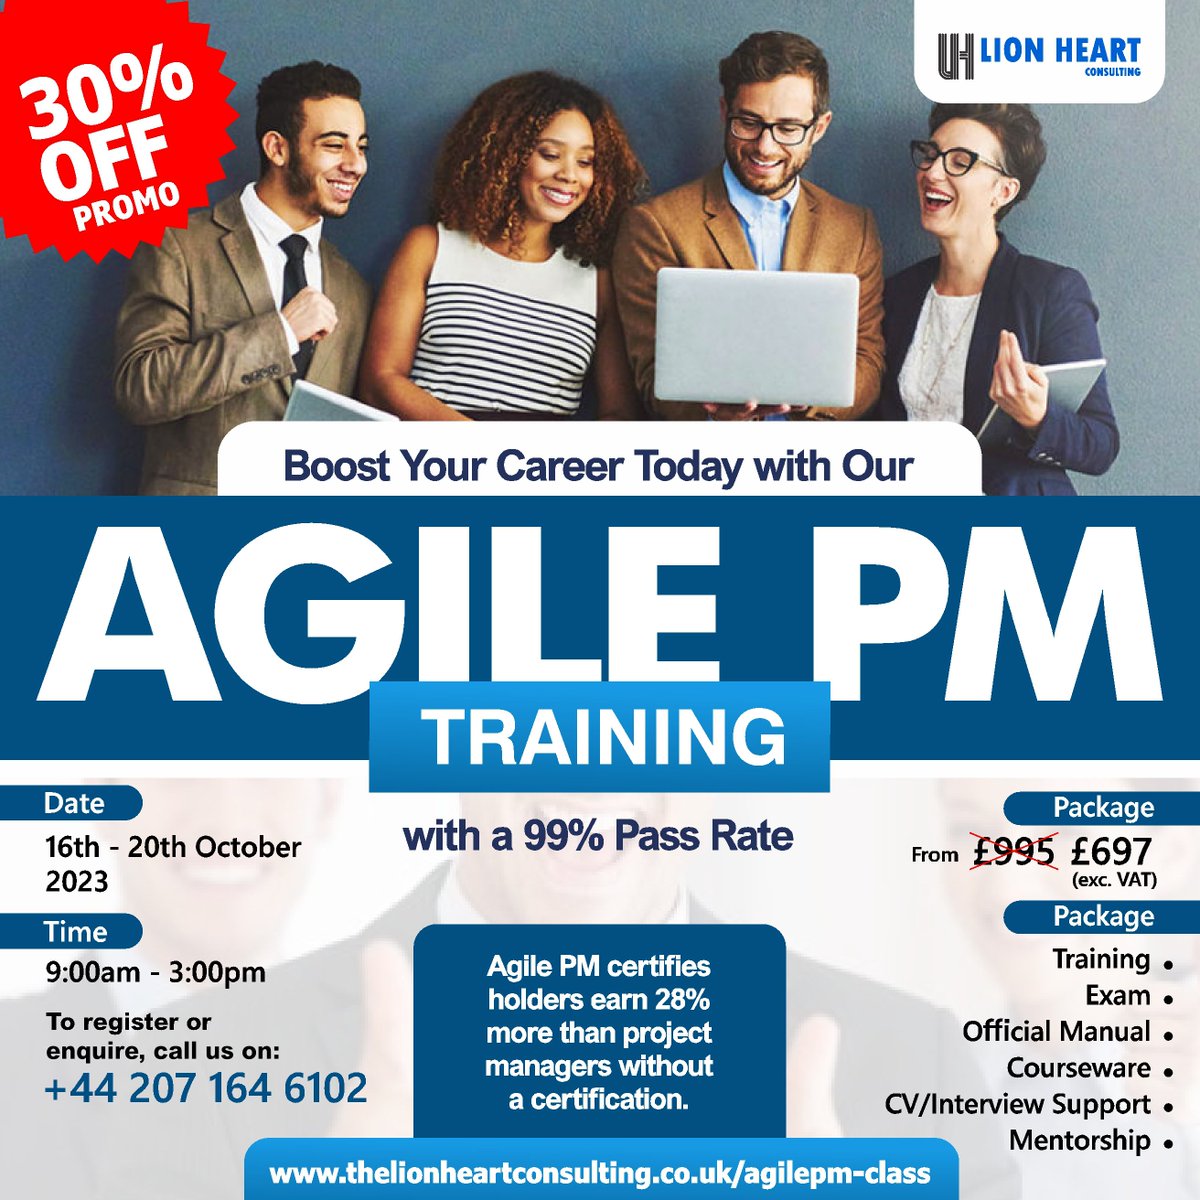 Lowest price offer on the Agile PM course. A 30% discount is on offer.

A certification in AgilePM will not only boost your skills, it will greatly improve your employment prospects and the wages you can command.

Enquire Here:
thelionheartconsulting.co.uk/agilepm-class

#Agile